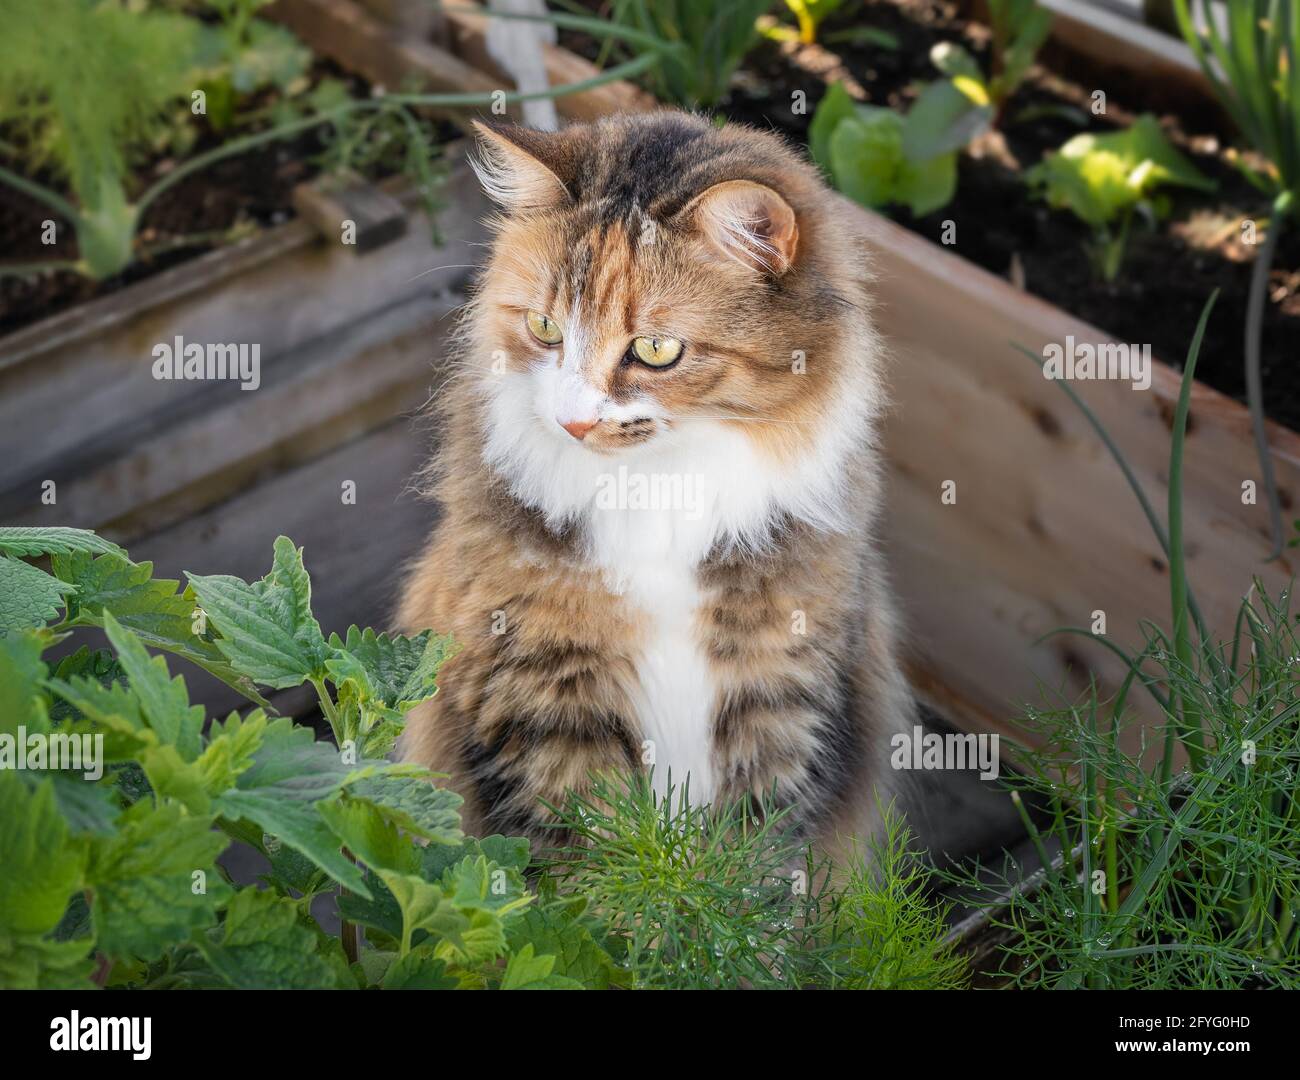 Adorable cat behind cat mint, looking at something. Curios multicolored female torbie kitty framed by garden planters and foliage. Striking asymmetric Stock Photo